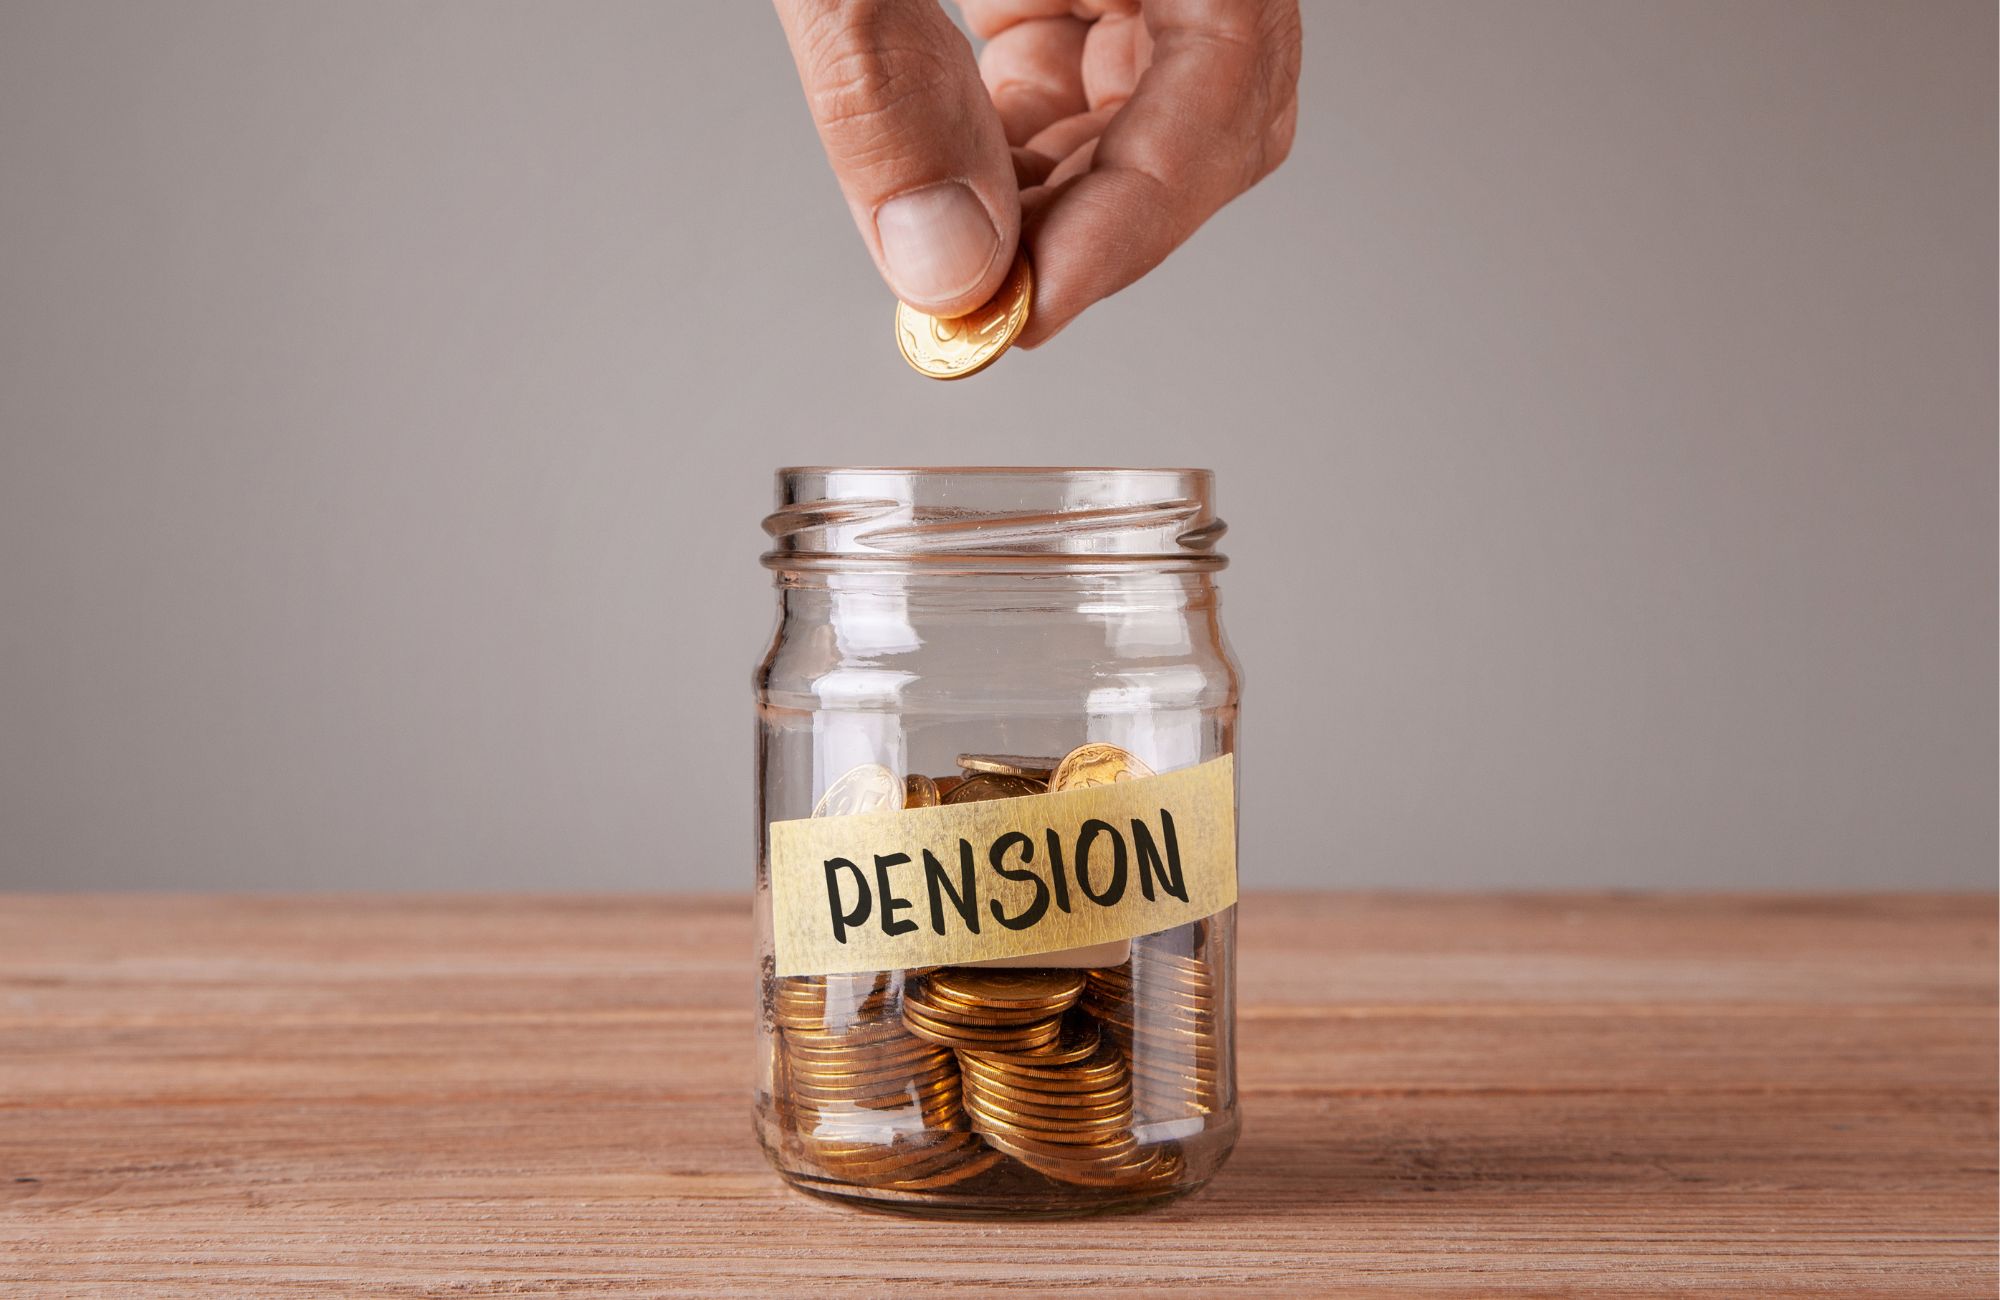 What is a personal pension?